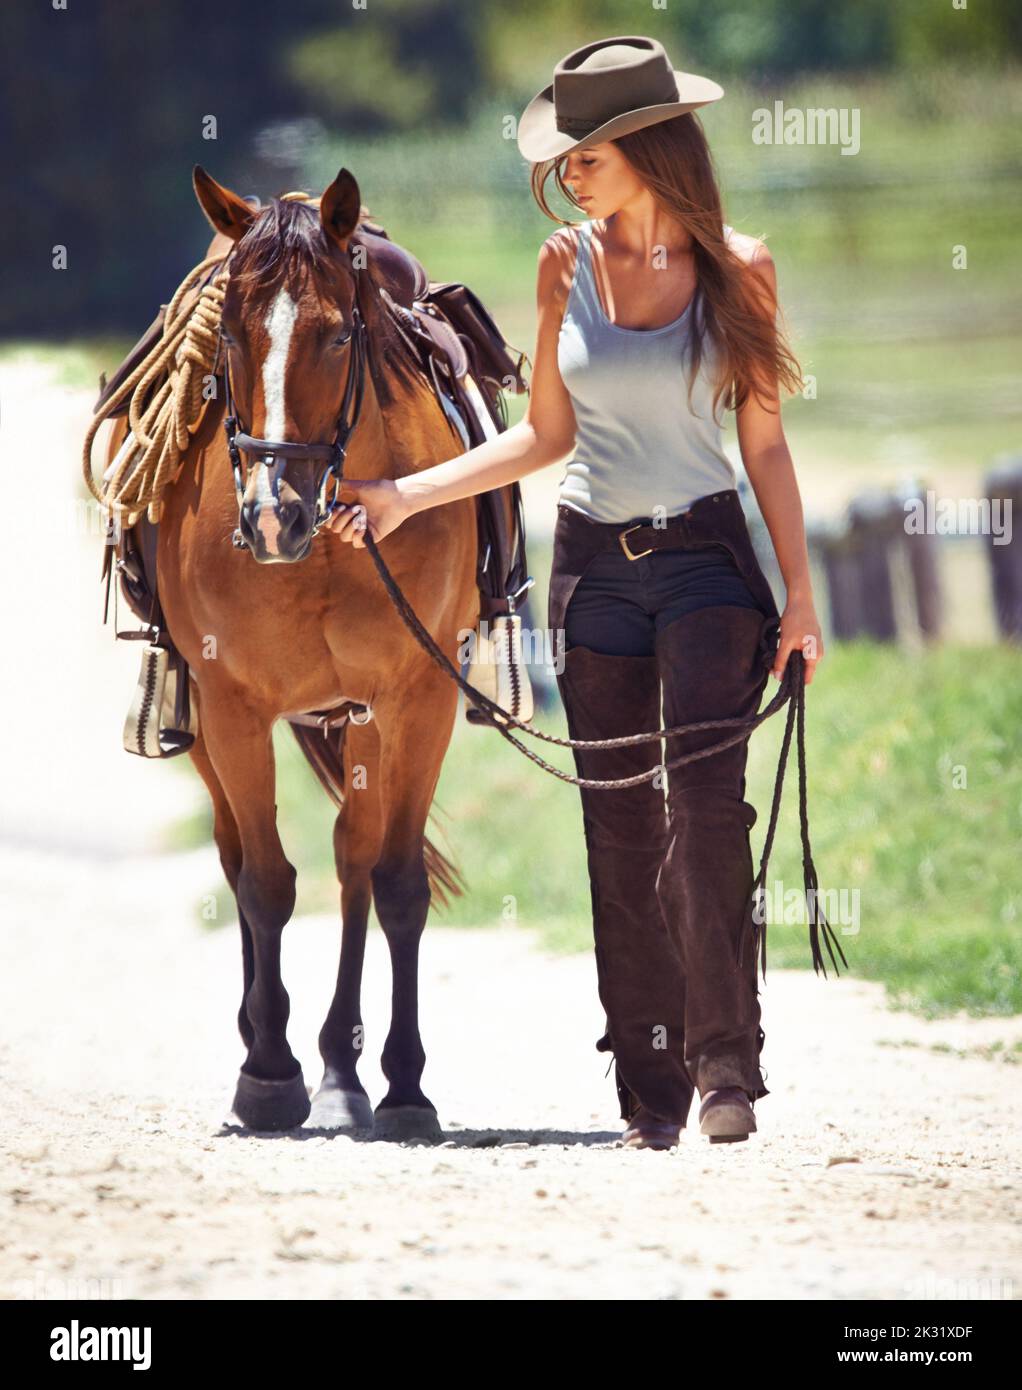 Loving the outdoors. A gorgeous cowgirl leading her horse along a country lane. Stock Photo